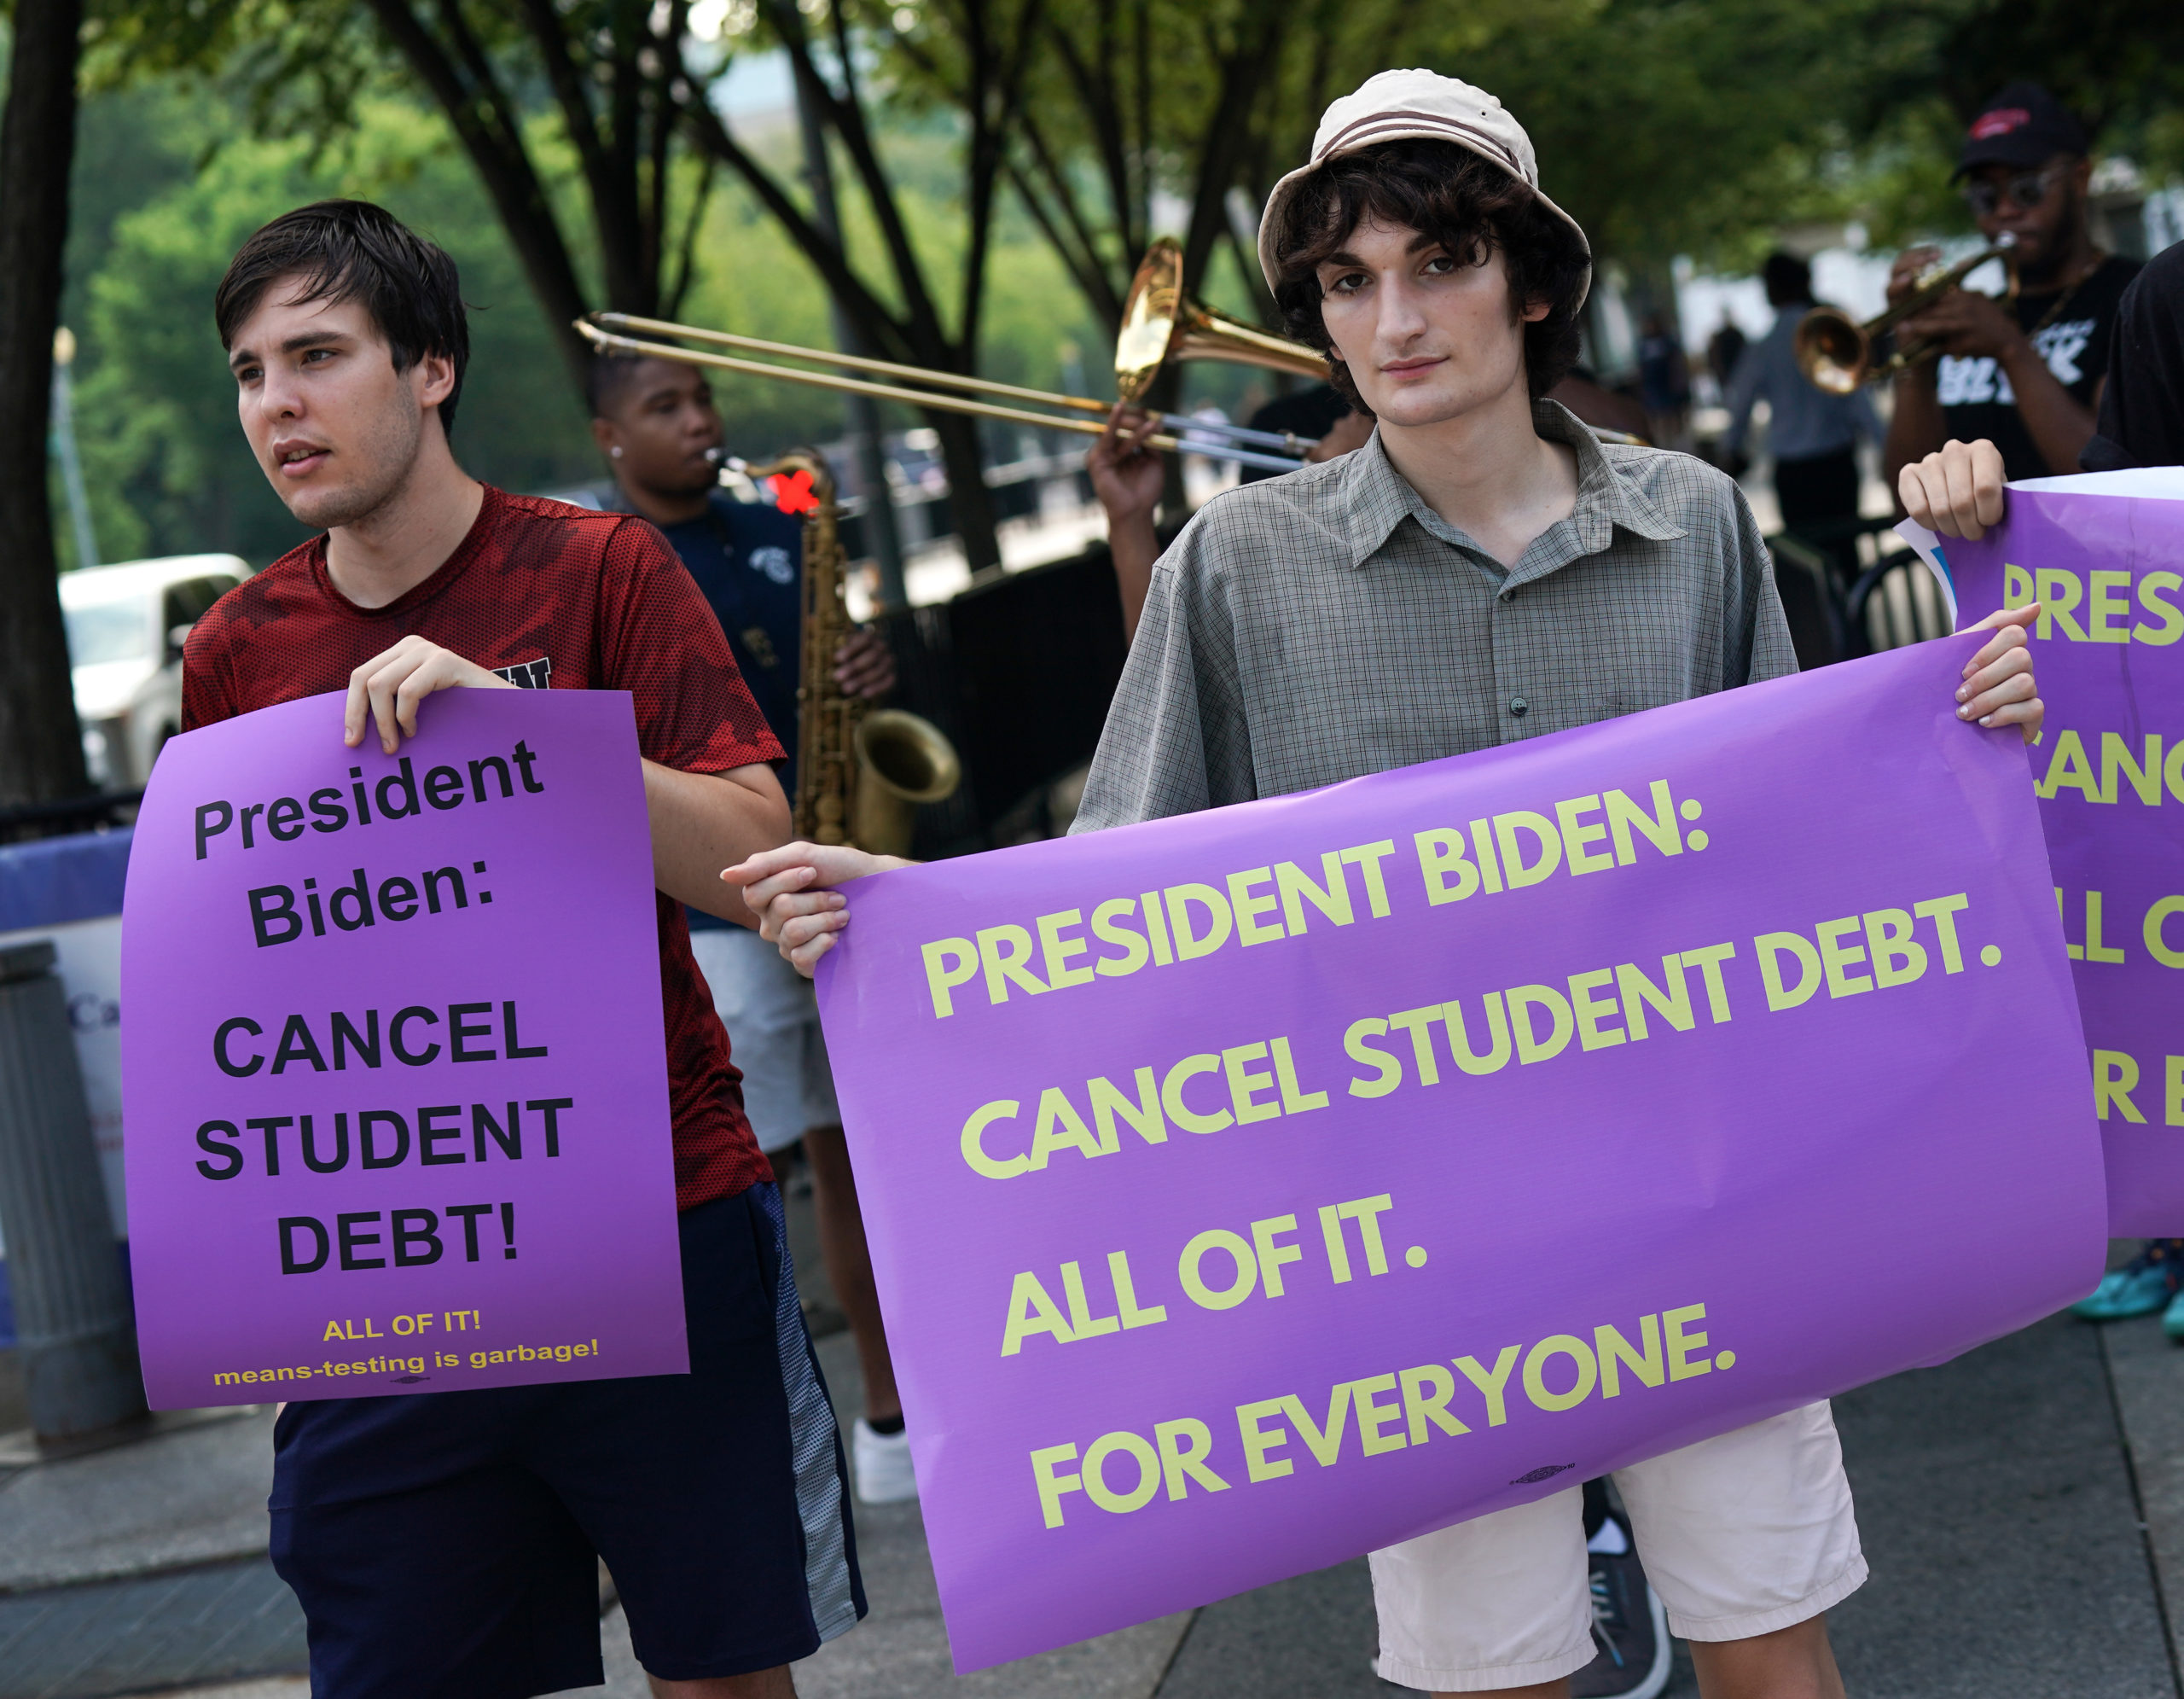 Student loan debt holders take part in a demonstration outside of the white house staff entrance to demand that President Biden cancel student loan debt in August on July 27, 2022 at the Executive Offices in Washington, DC. (Photo by Jemal Countess/Getty Images for We, The 45 Million)